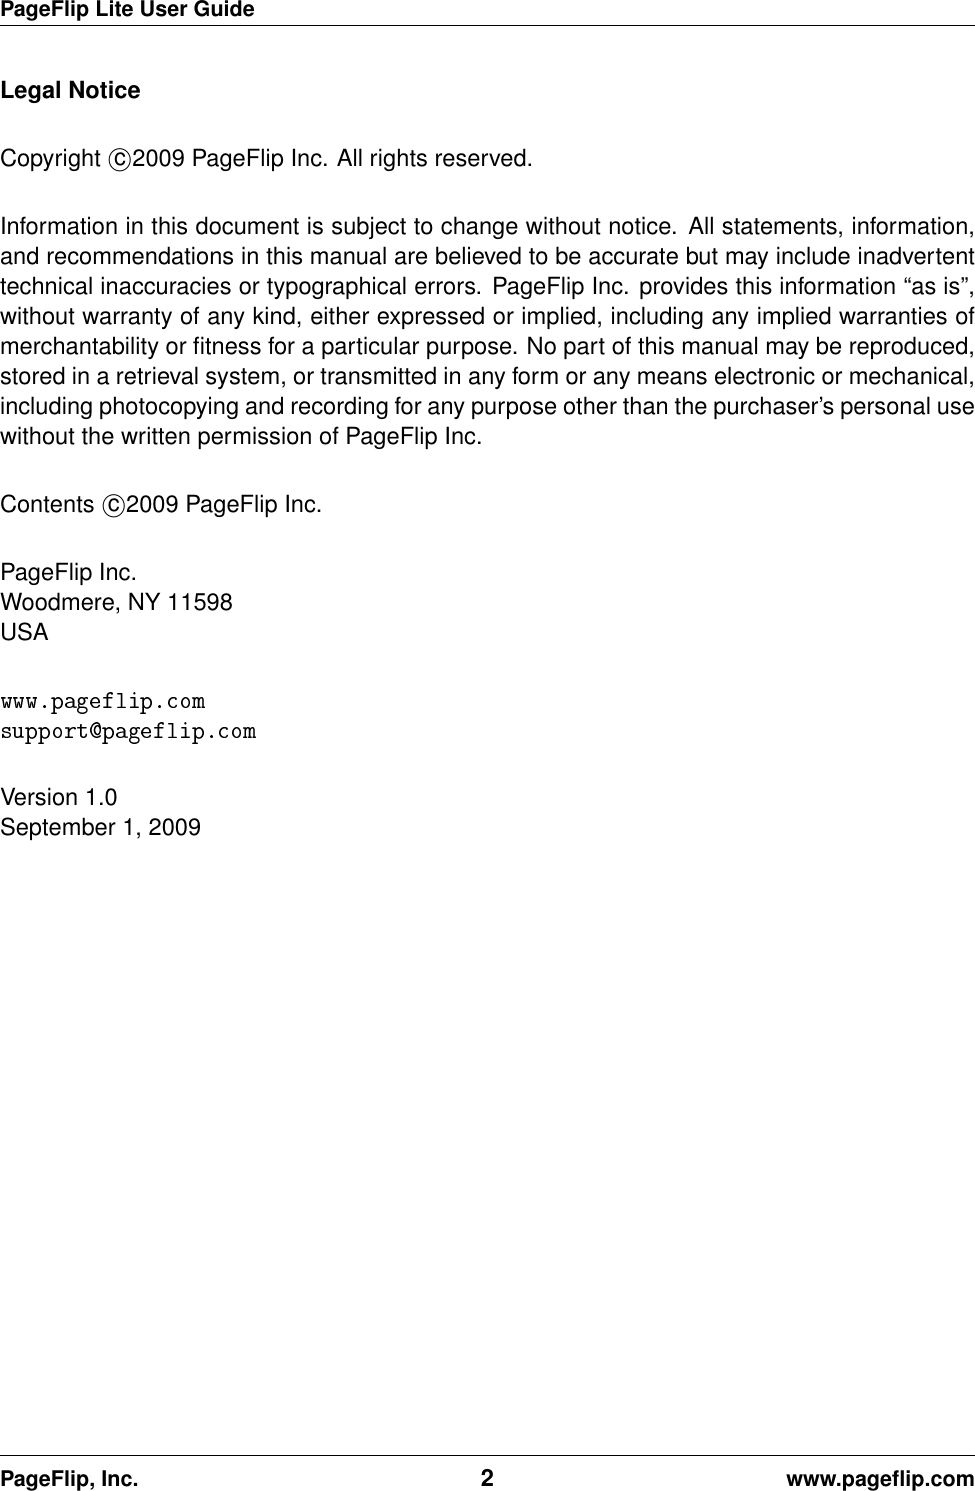 PageFlip Lite User GuideLegal NoticeCopyright c2009 PageFlip Inc. All rights reserved.Information in this document is subject to change without notice. All statements, information,and recommendations in this manual are believed to be accurate but may include inadvertenttechnical inaccuracies or typographical errors. PageFlip Inc. provides this information “as is”,without warranty of any kind, either expressed or implied, including any implied warranties ofmerchantability or ﬁtness for a particular purpose. No part of this manual may be reproduced,stored in a retrieval system, or transmitted in any form or any means electronic or mechanical,including photocopying and recording for any purpose other than the purchaser’s personal usewithout the written permission of PageFlip Inc.Contents c2009 PageFlip Inc.PageFlip Inc.Woodmere, NY 11598USAVersion 1.0September 1, 2009PageFlip, Inc. 2www.pageﬂip.com